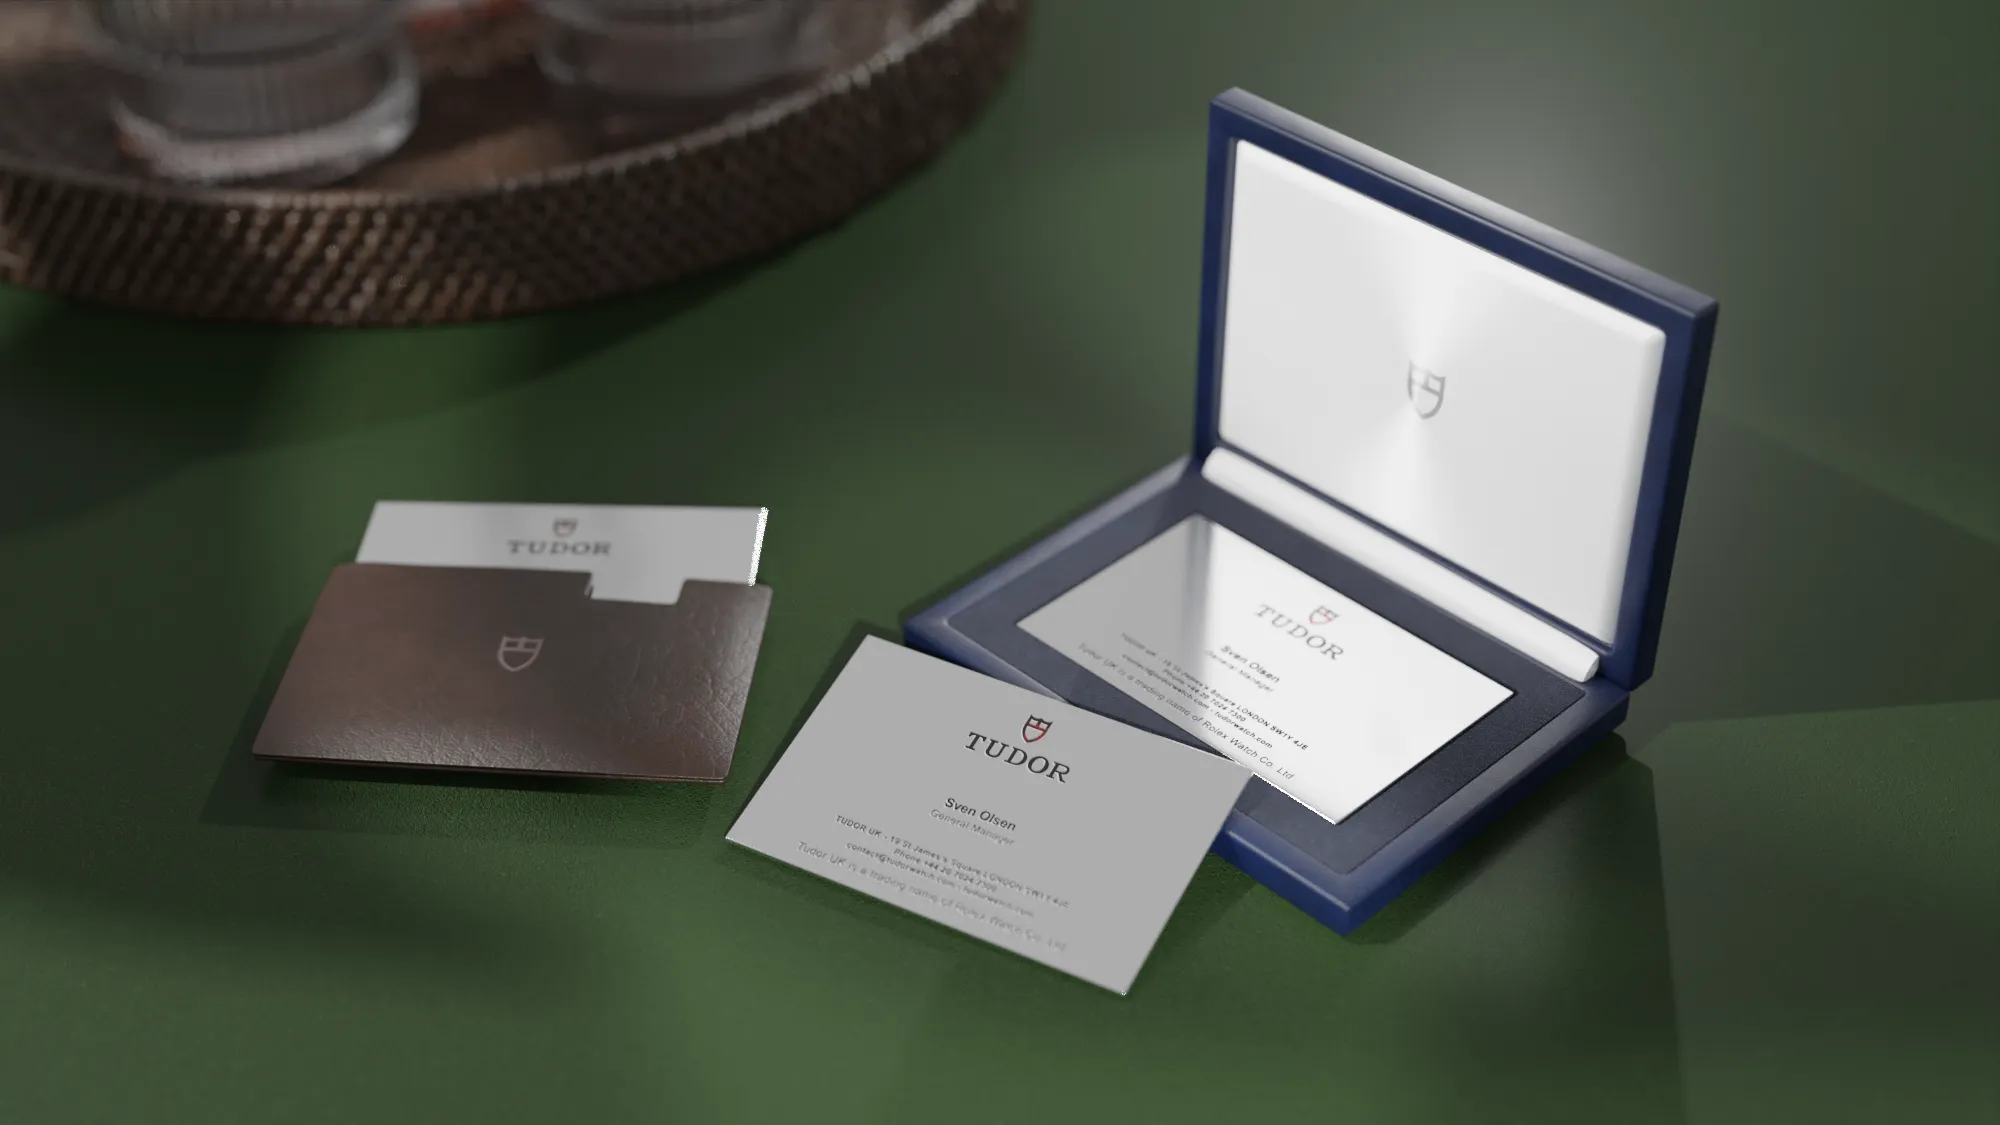 Tudor business cards in sterling silver with brown mushroom leather pouch and FSC-certified wooden case